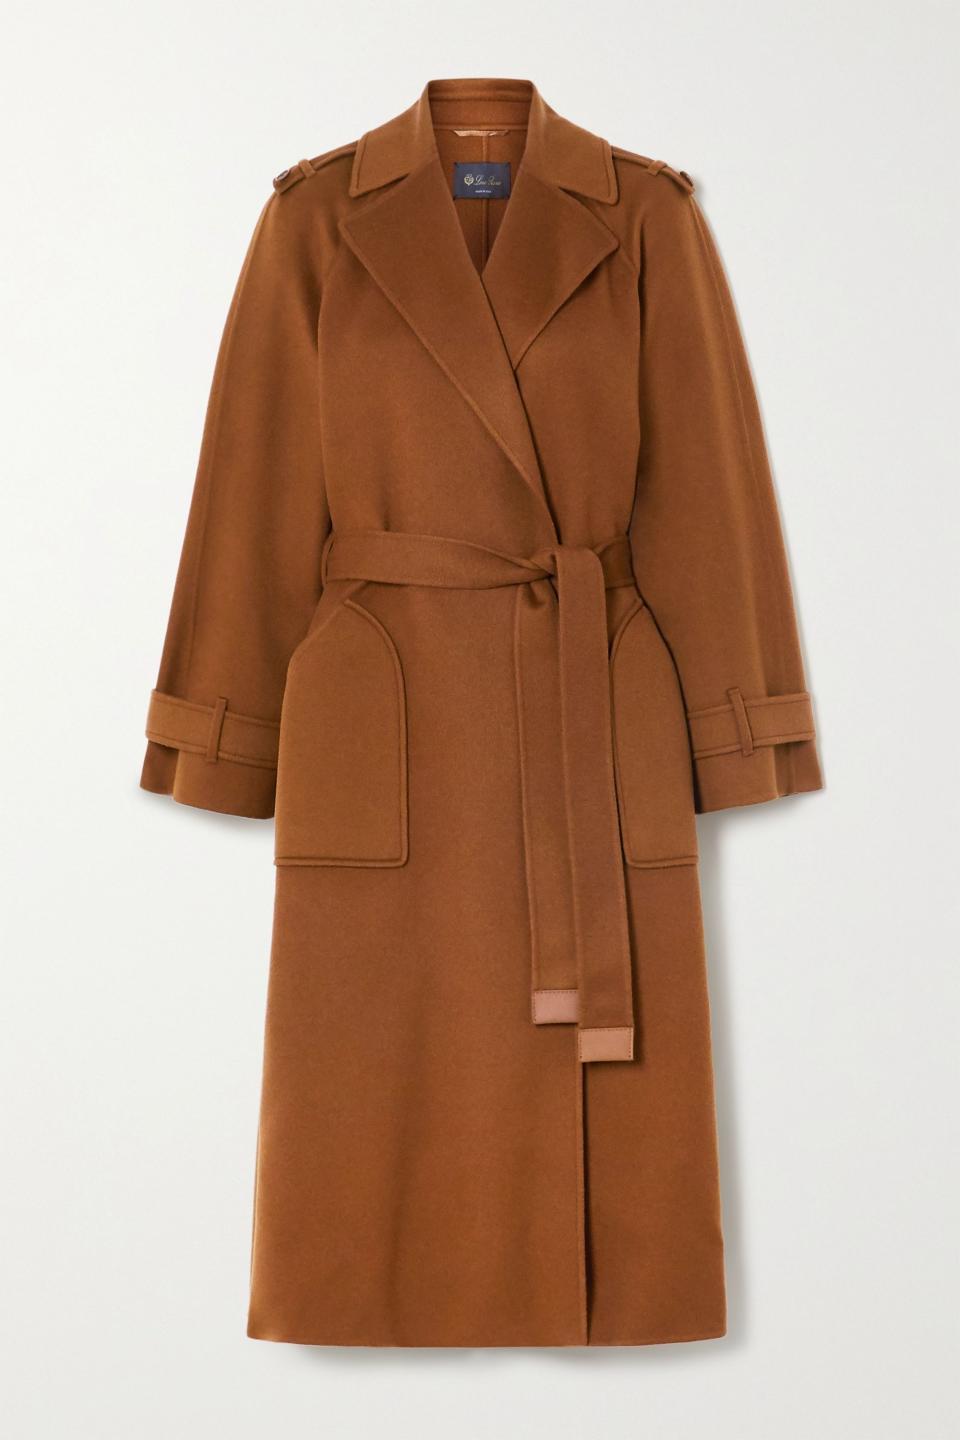 11) Belted cashmere trench coat